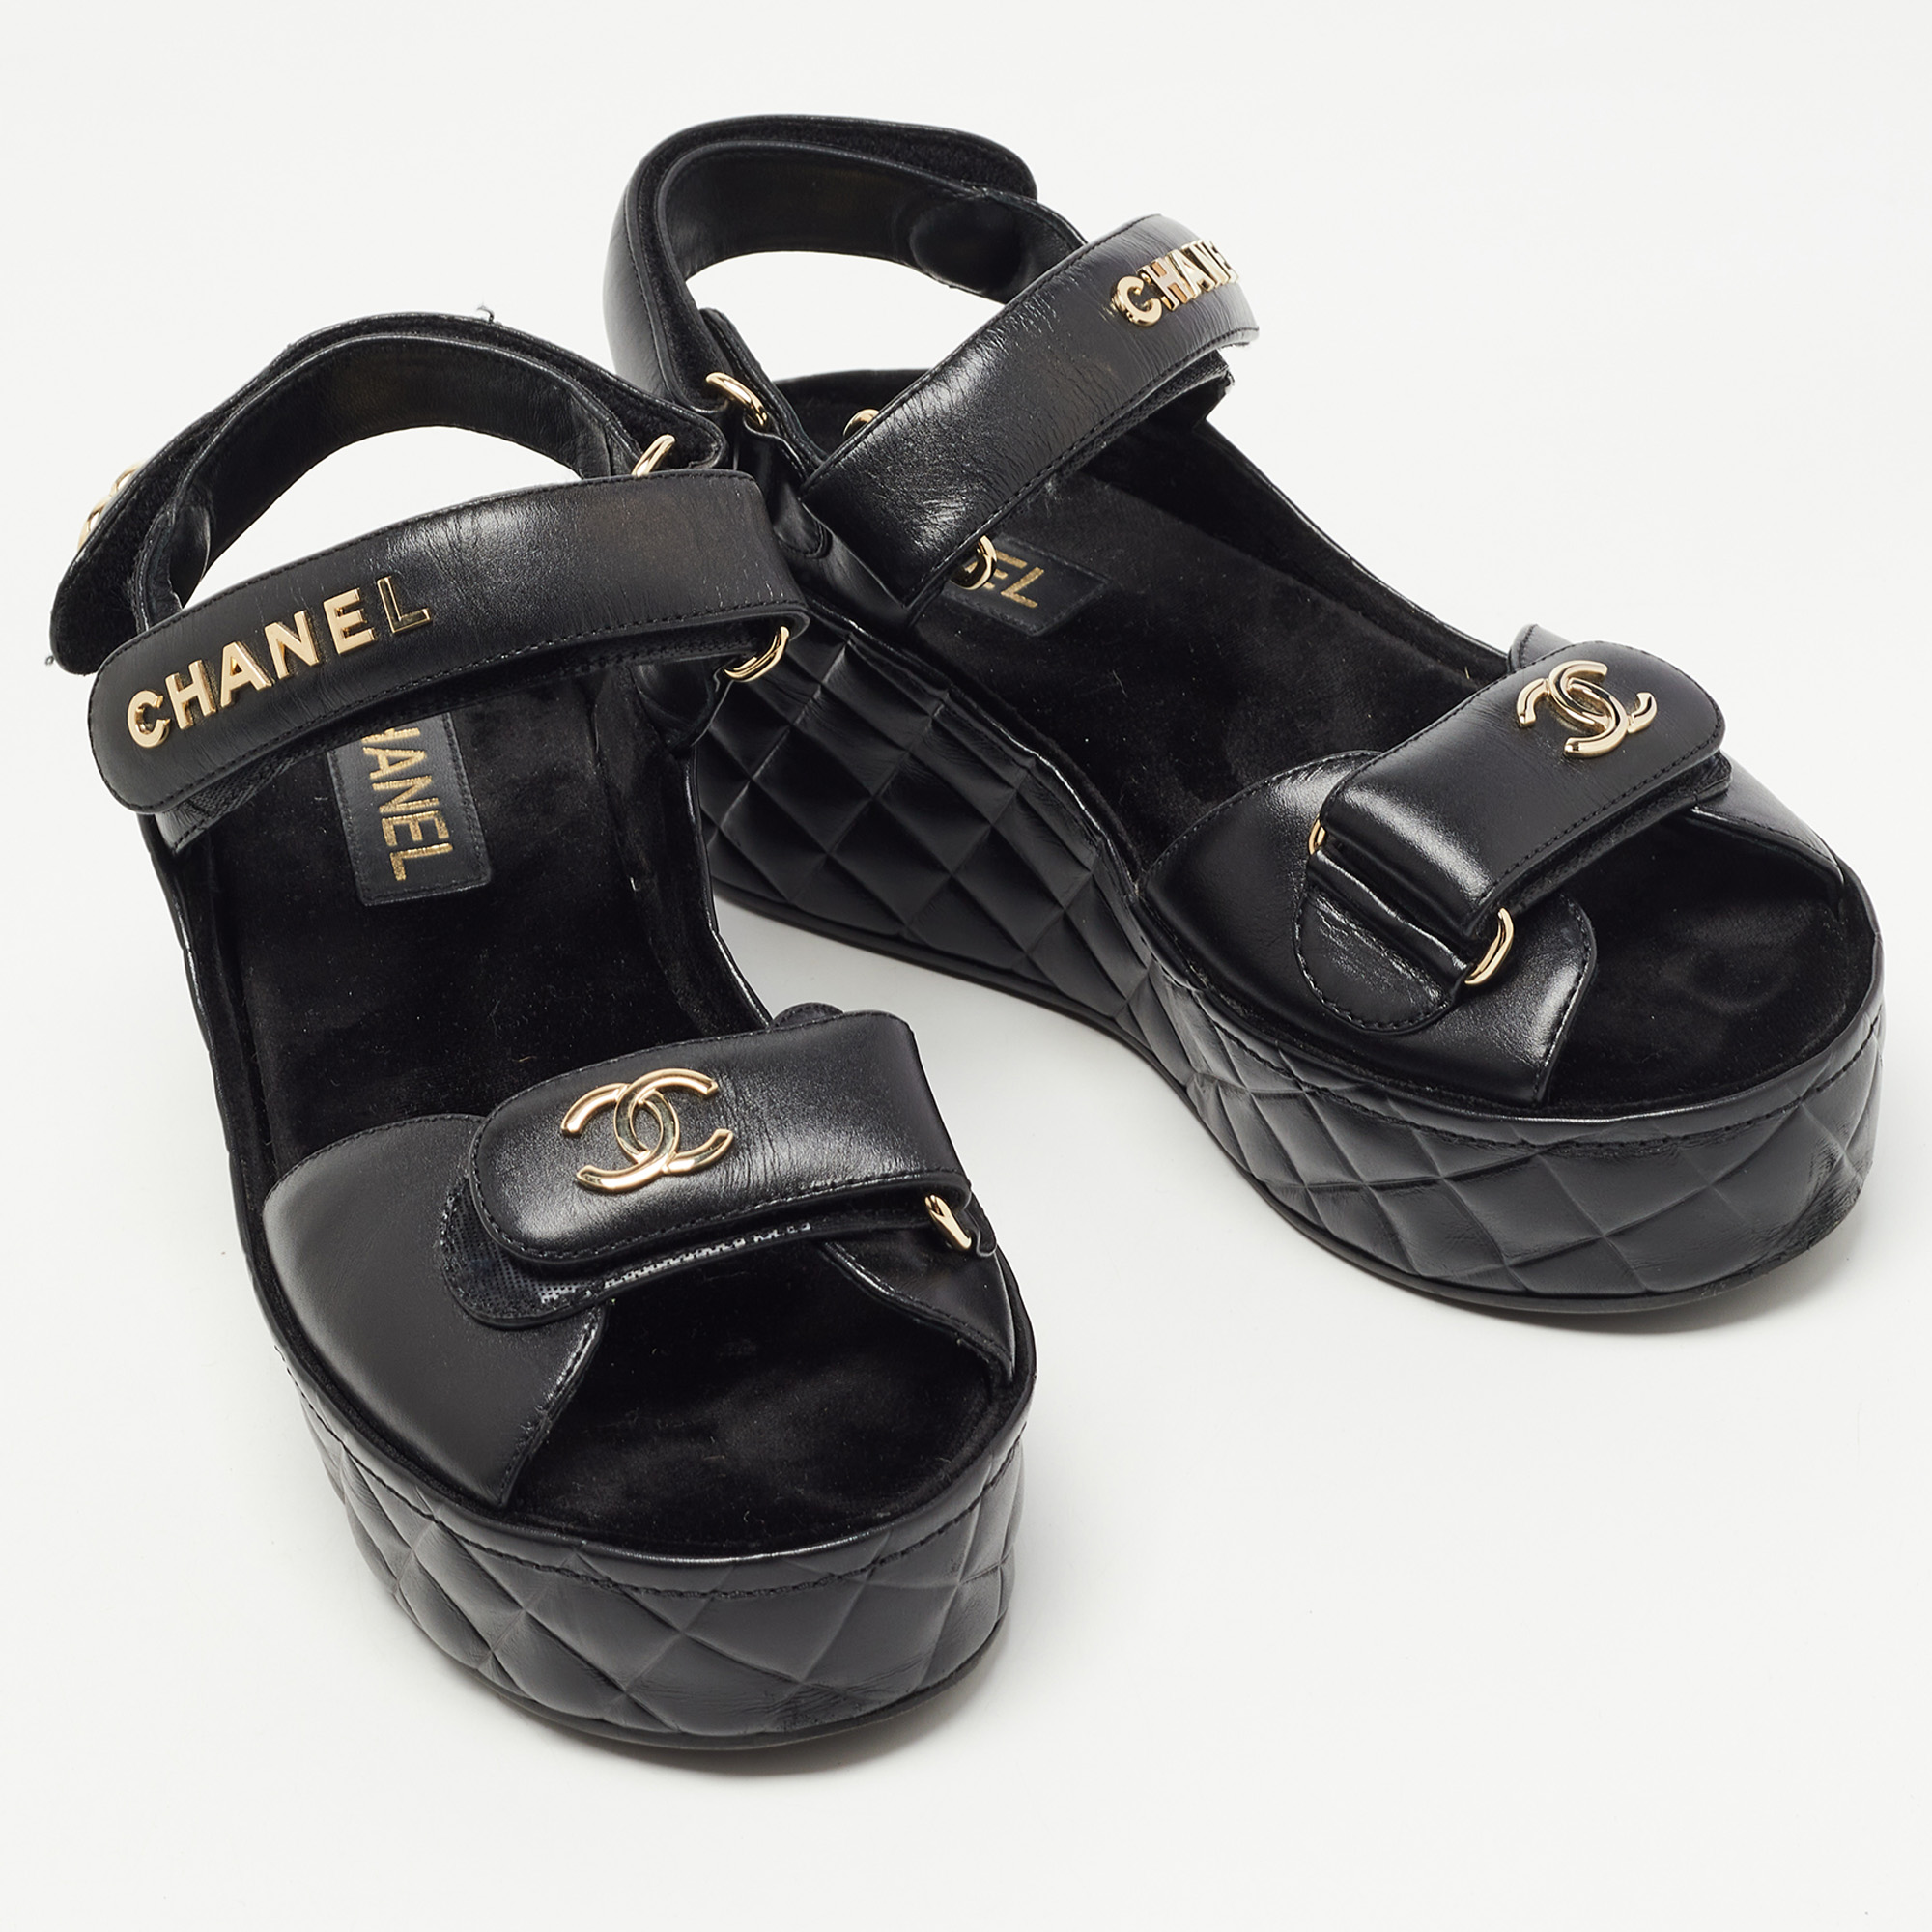 CHANEL Shiny Calfskin Quilted Wedge Sandals 38 Black 914125